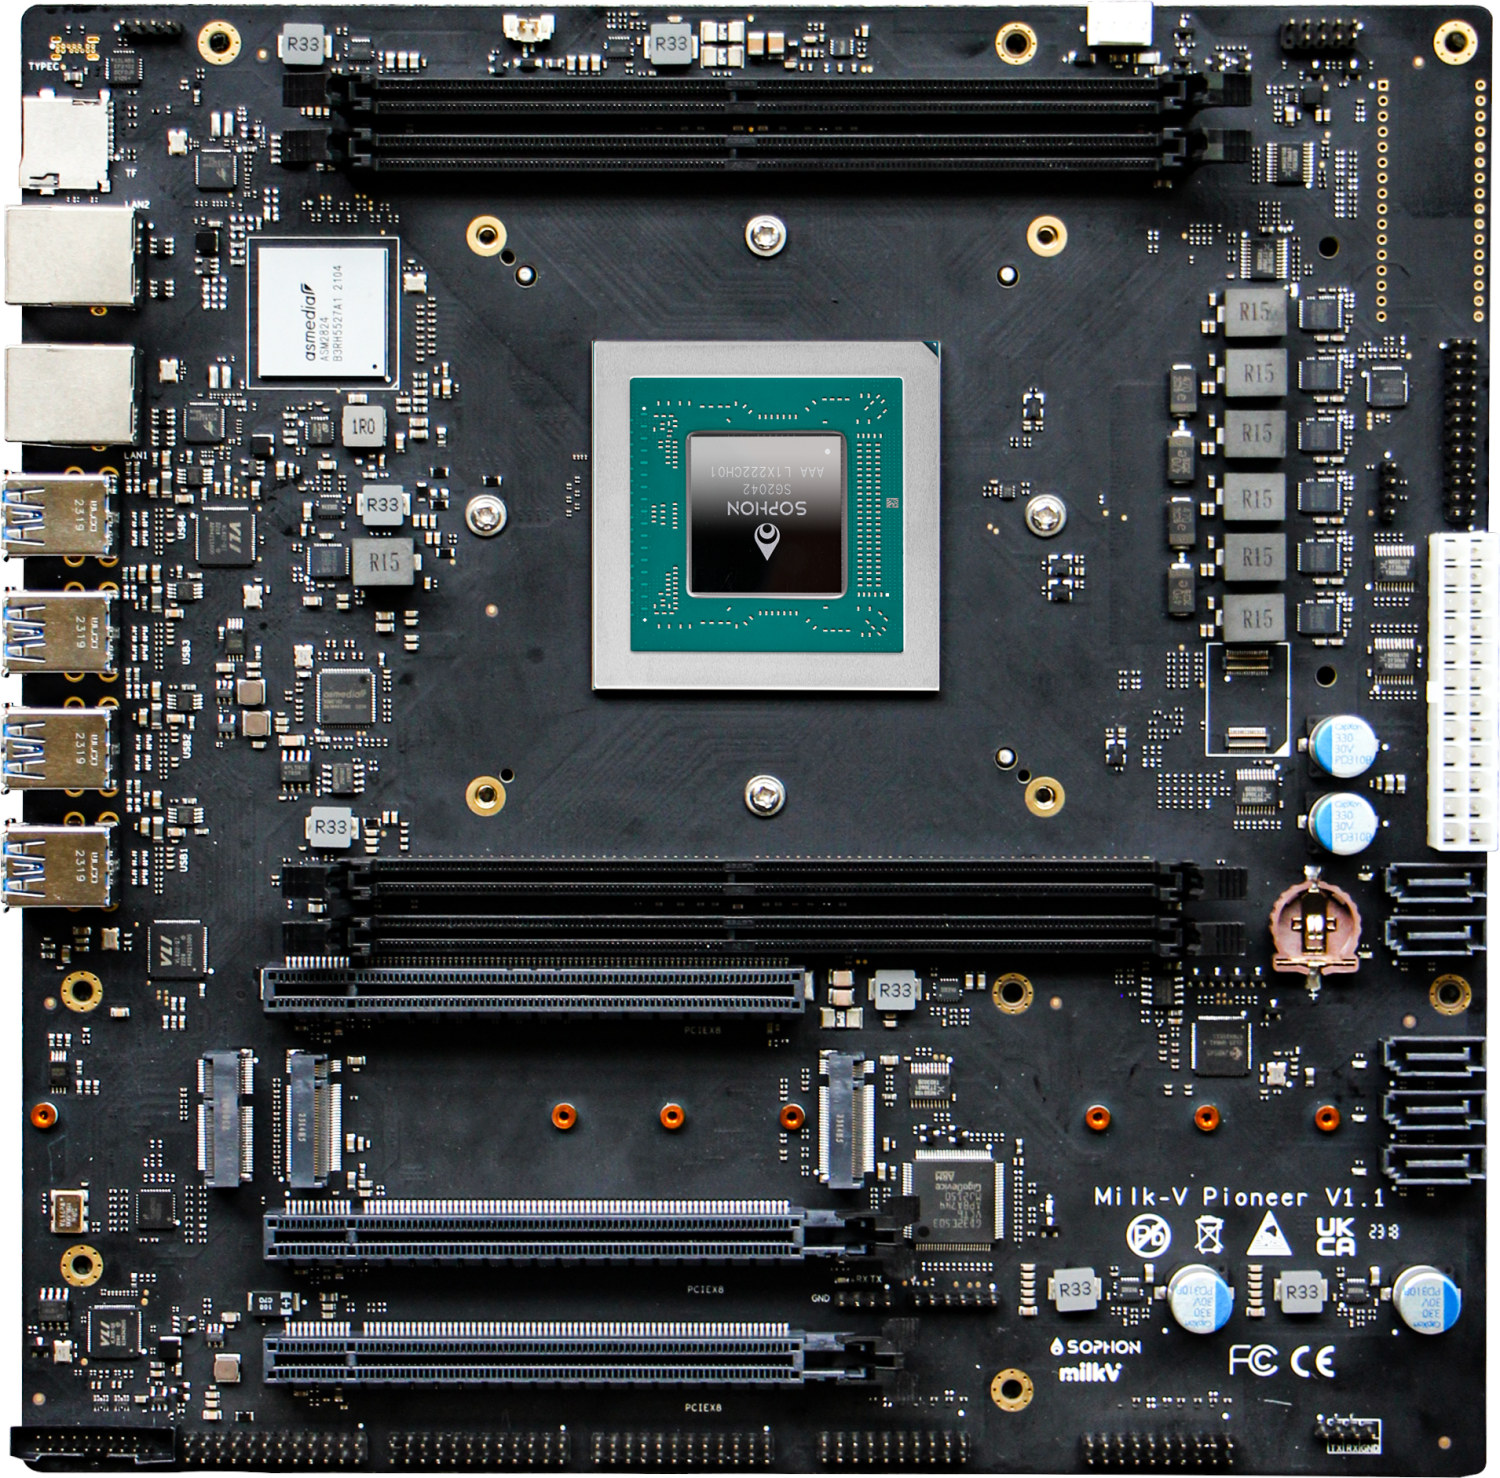 64-core RISC-V motherboard